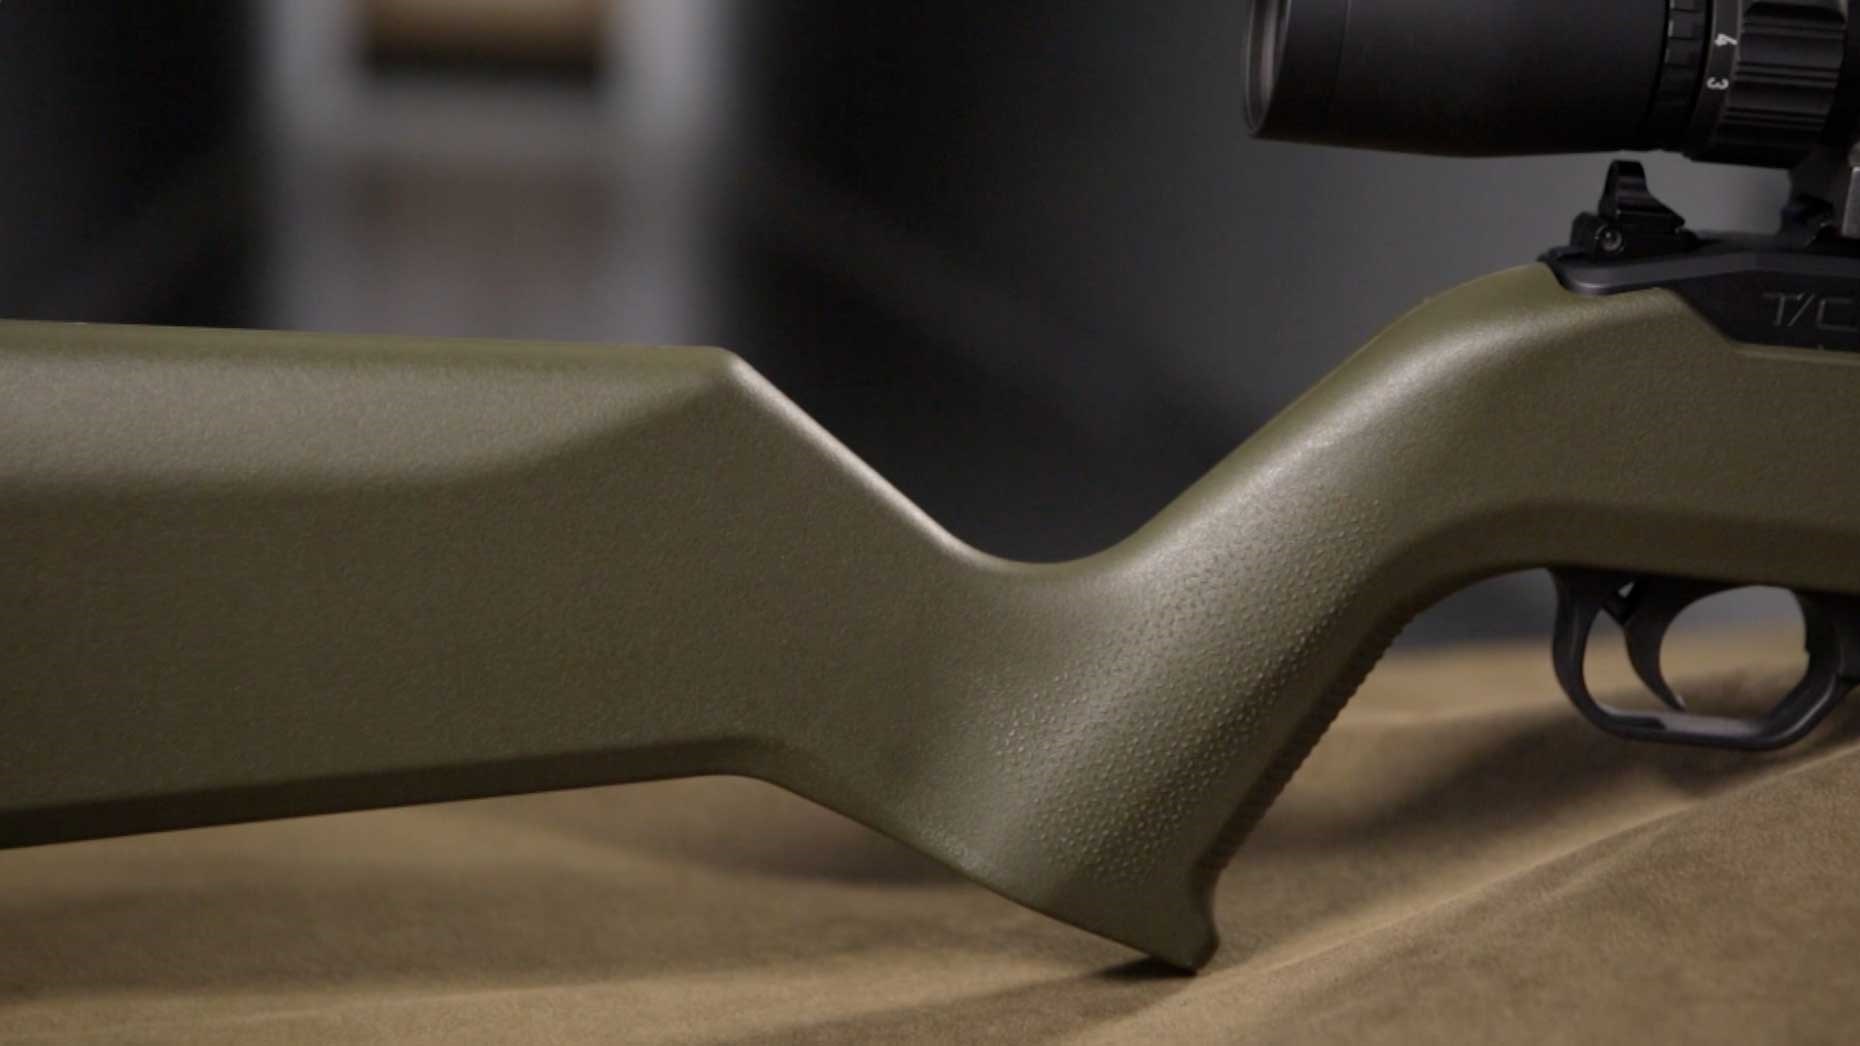 The steep pistol grip and angular lines of the green Magpul stock displayed on the T/CR22.